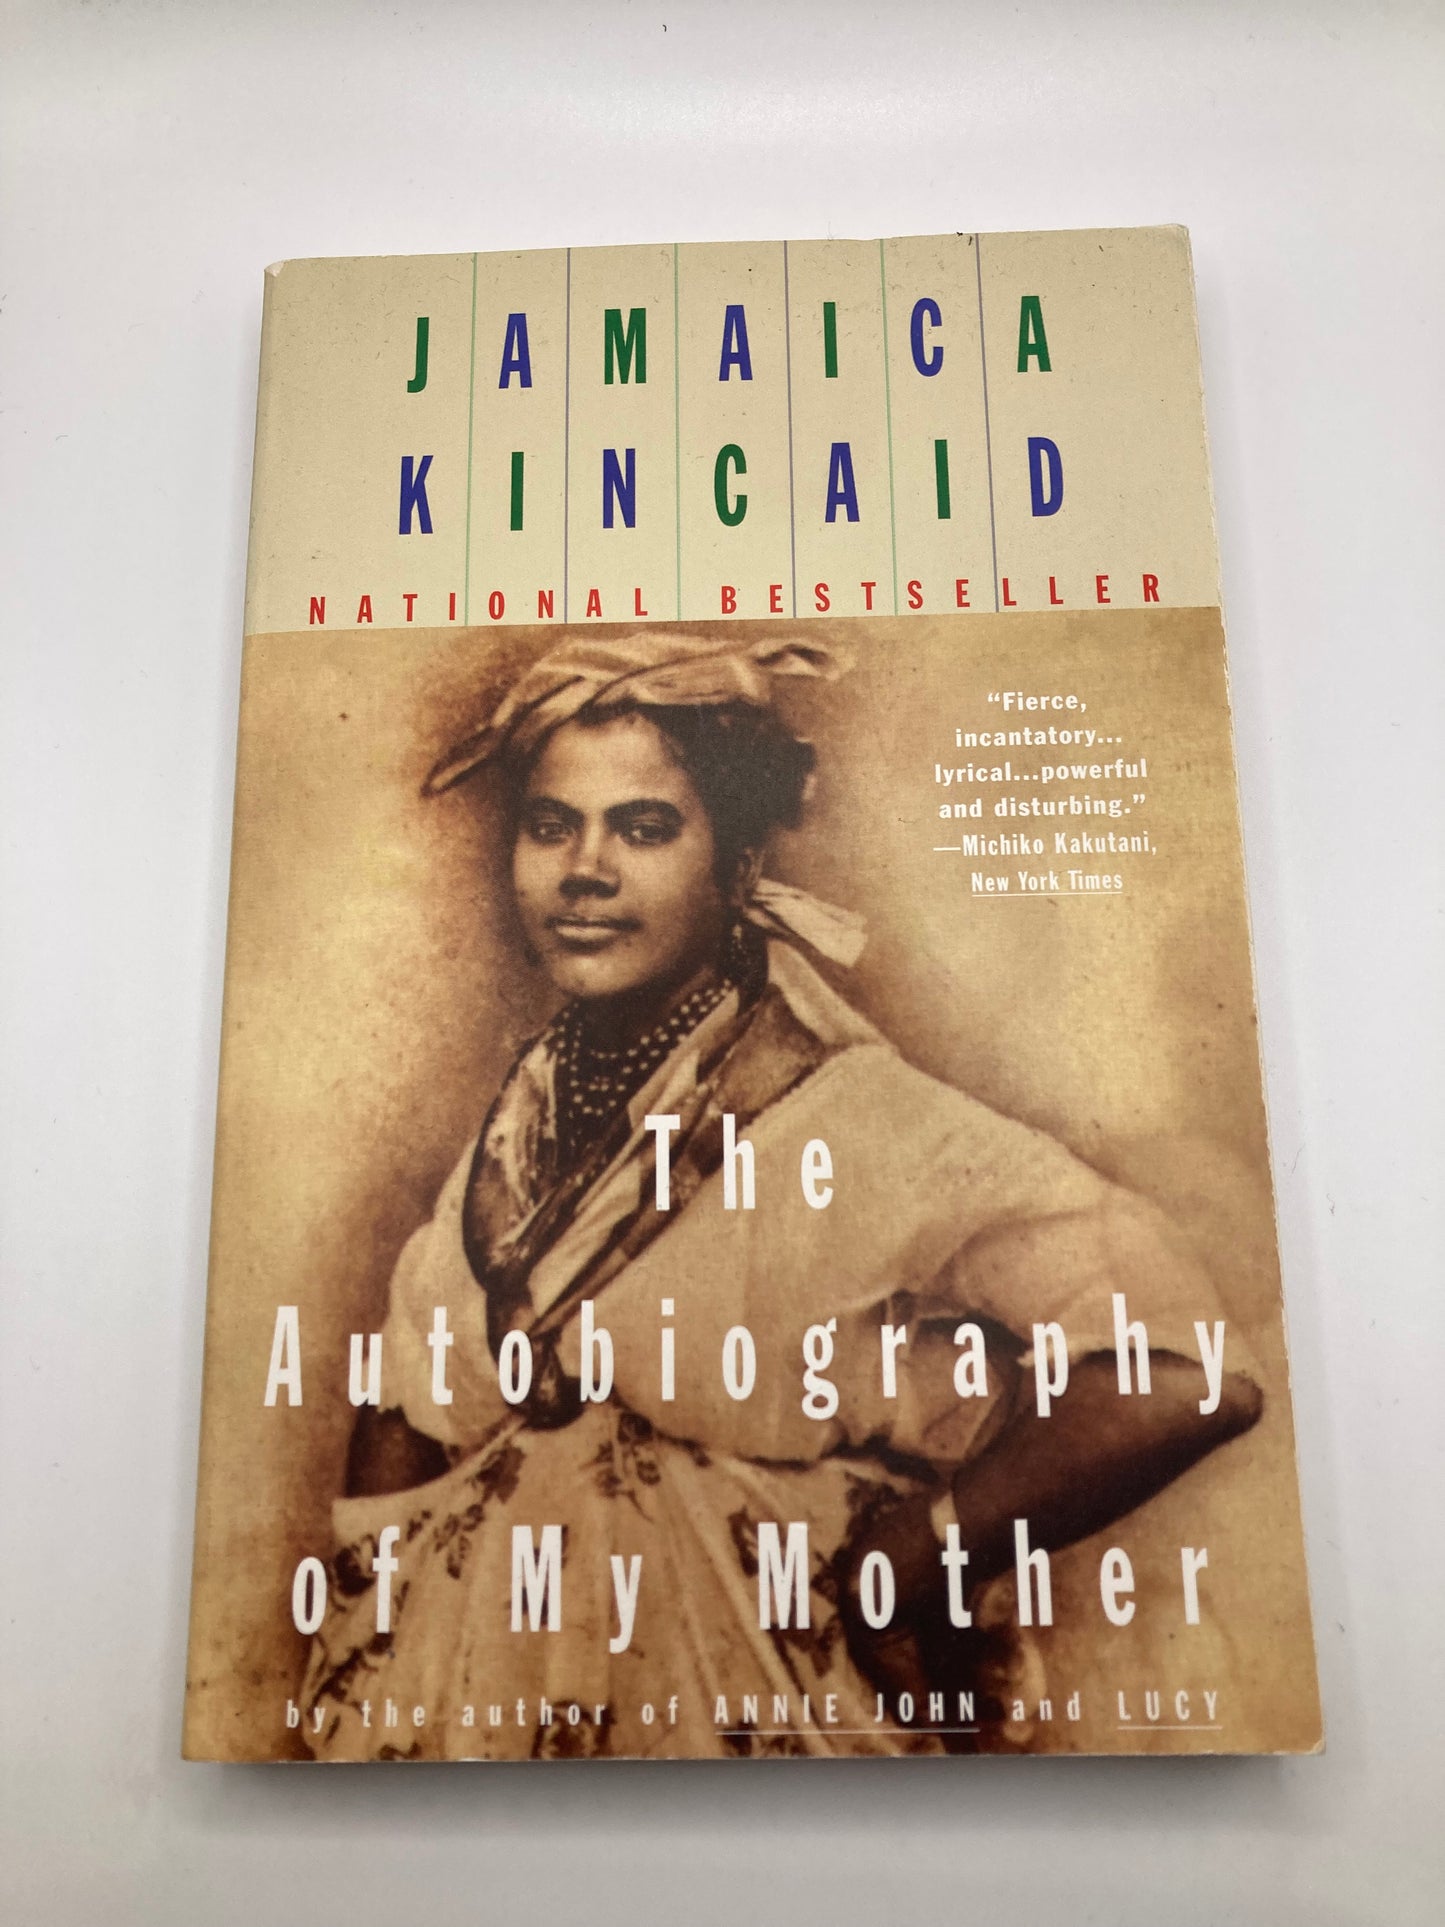 The Autobiography of My Mother by Jamaica Kincaid